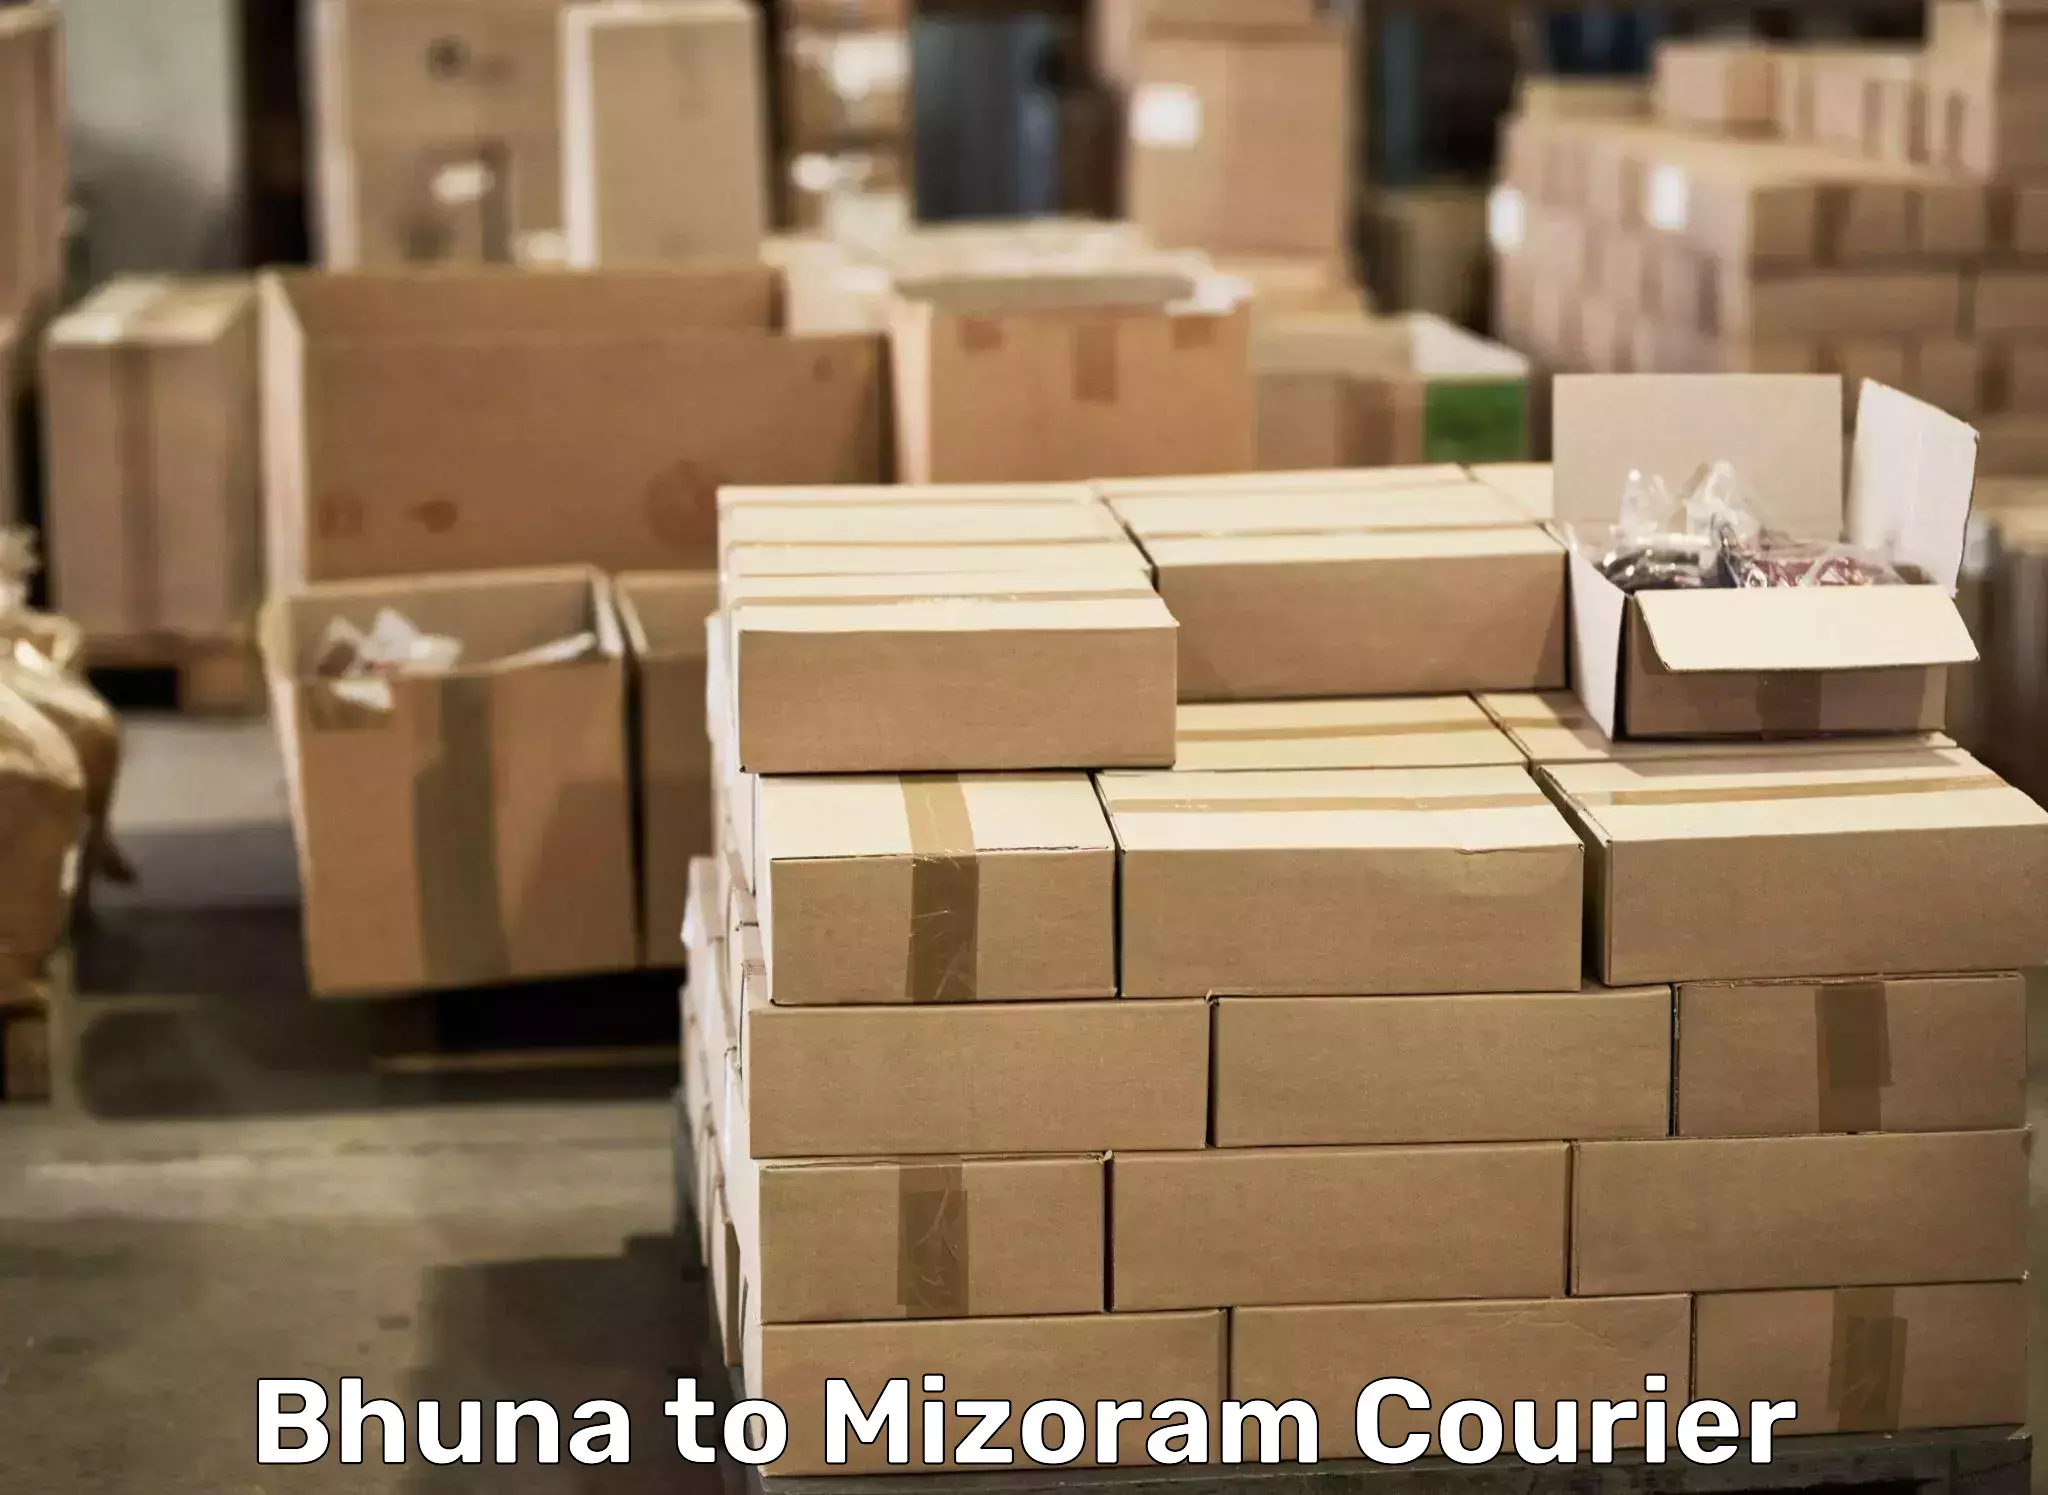 Trusted relocation experts Bhuna to Aizawl